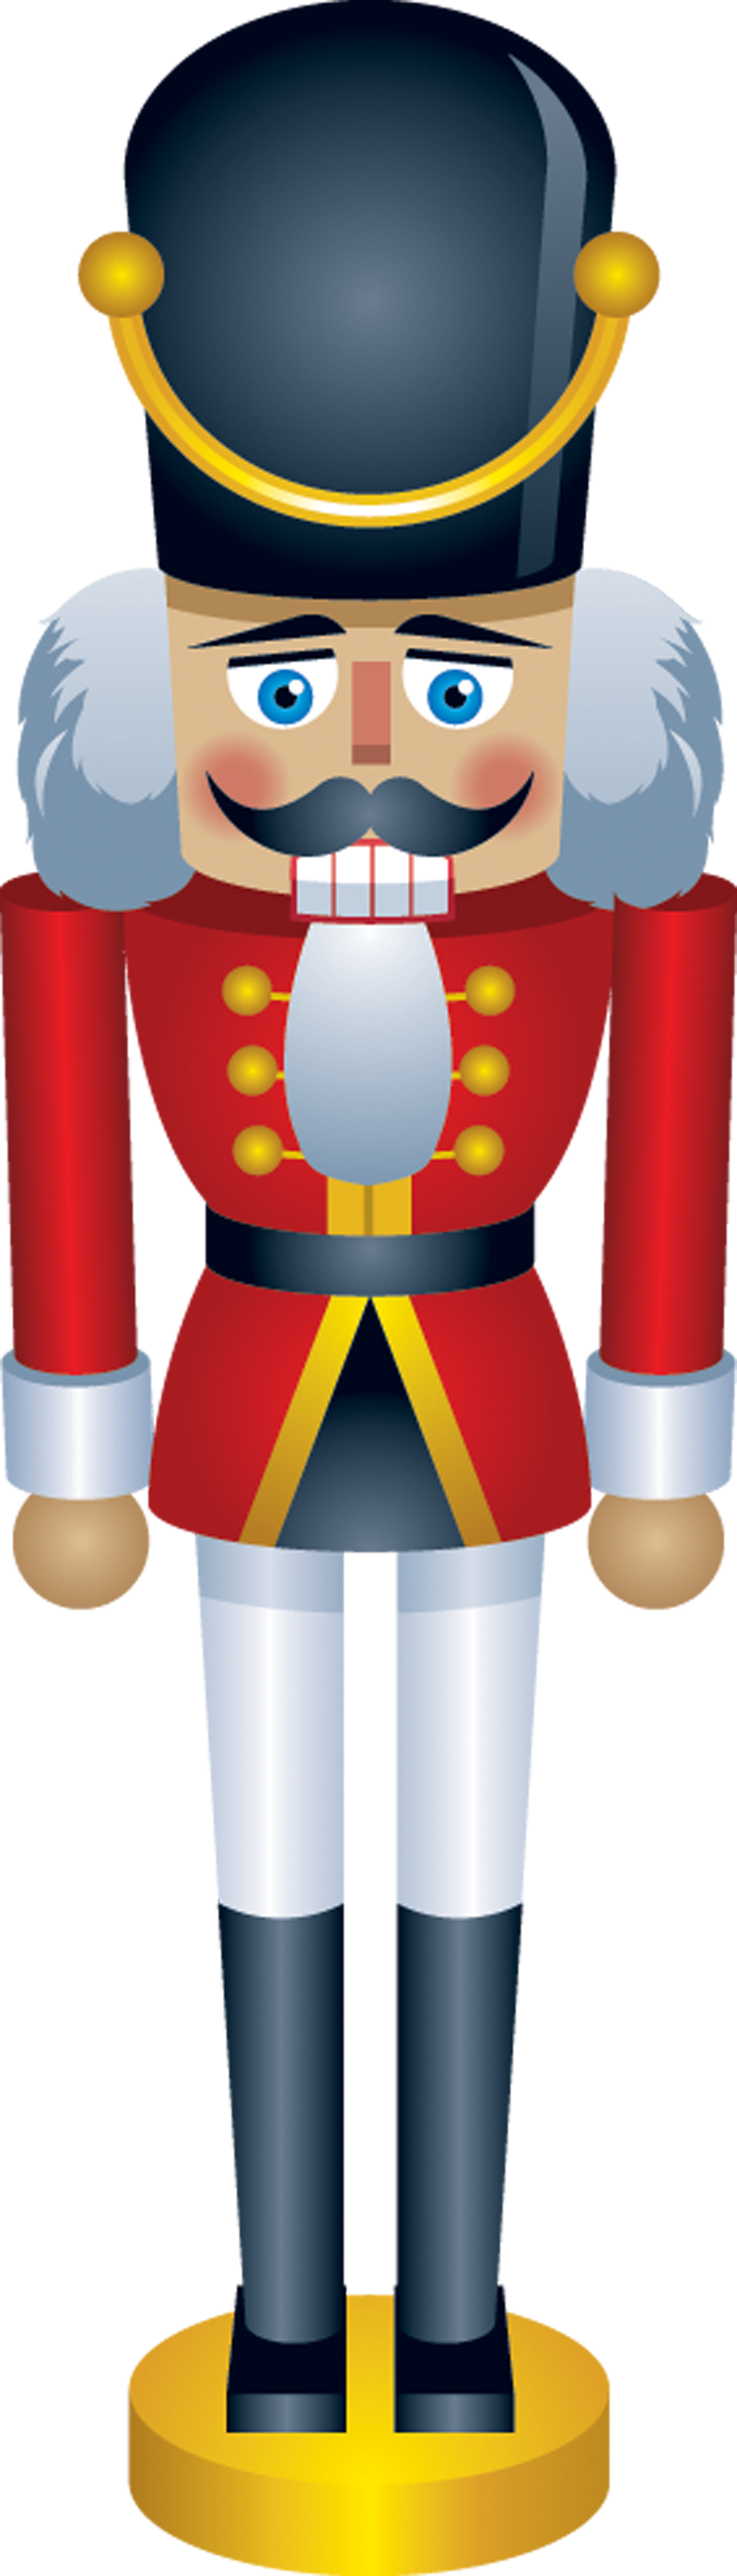 Download Nutcracker clipart three, Nutcracker three Transparent FREE for download on WebStockReview 2021